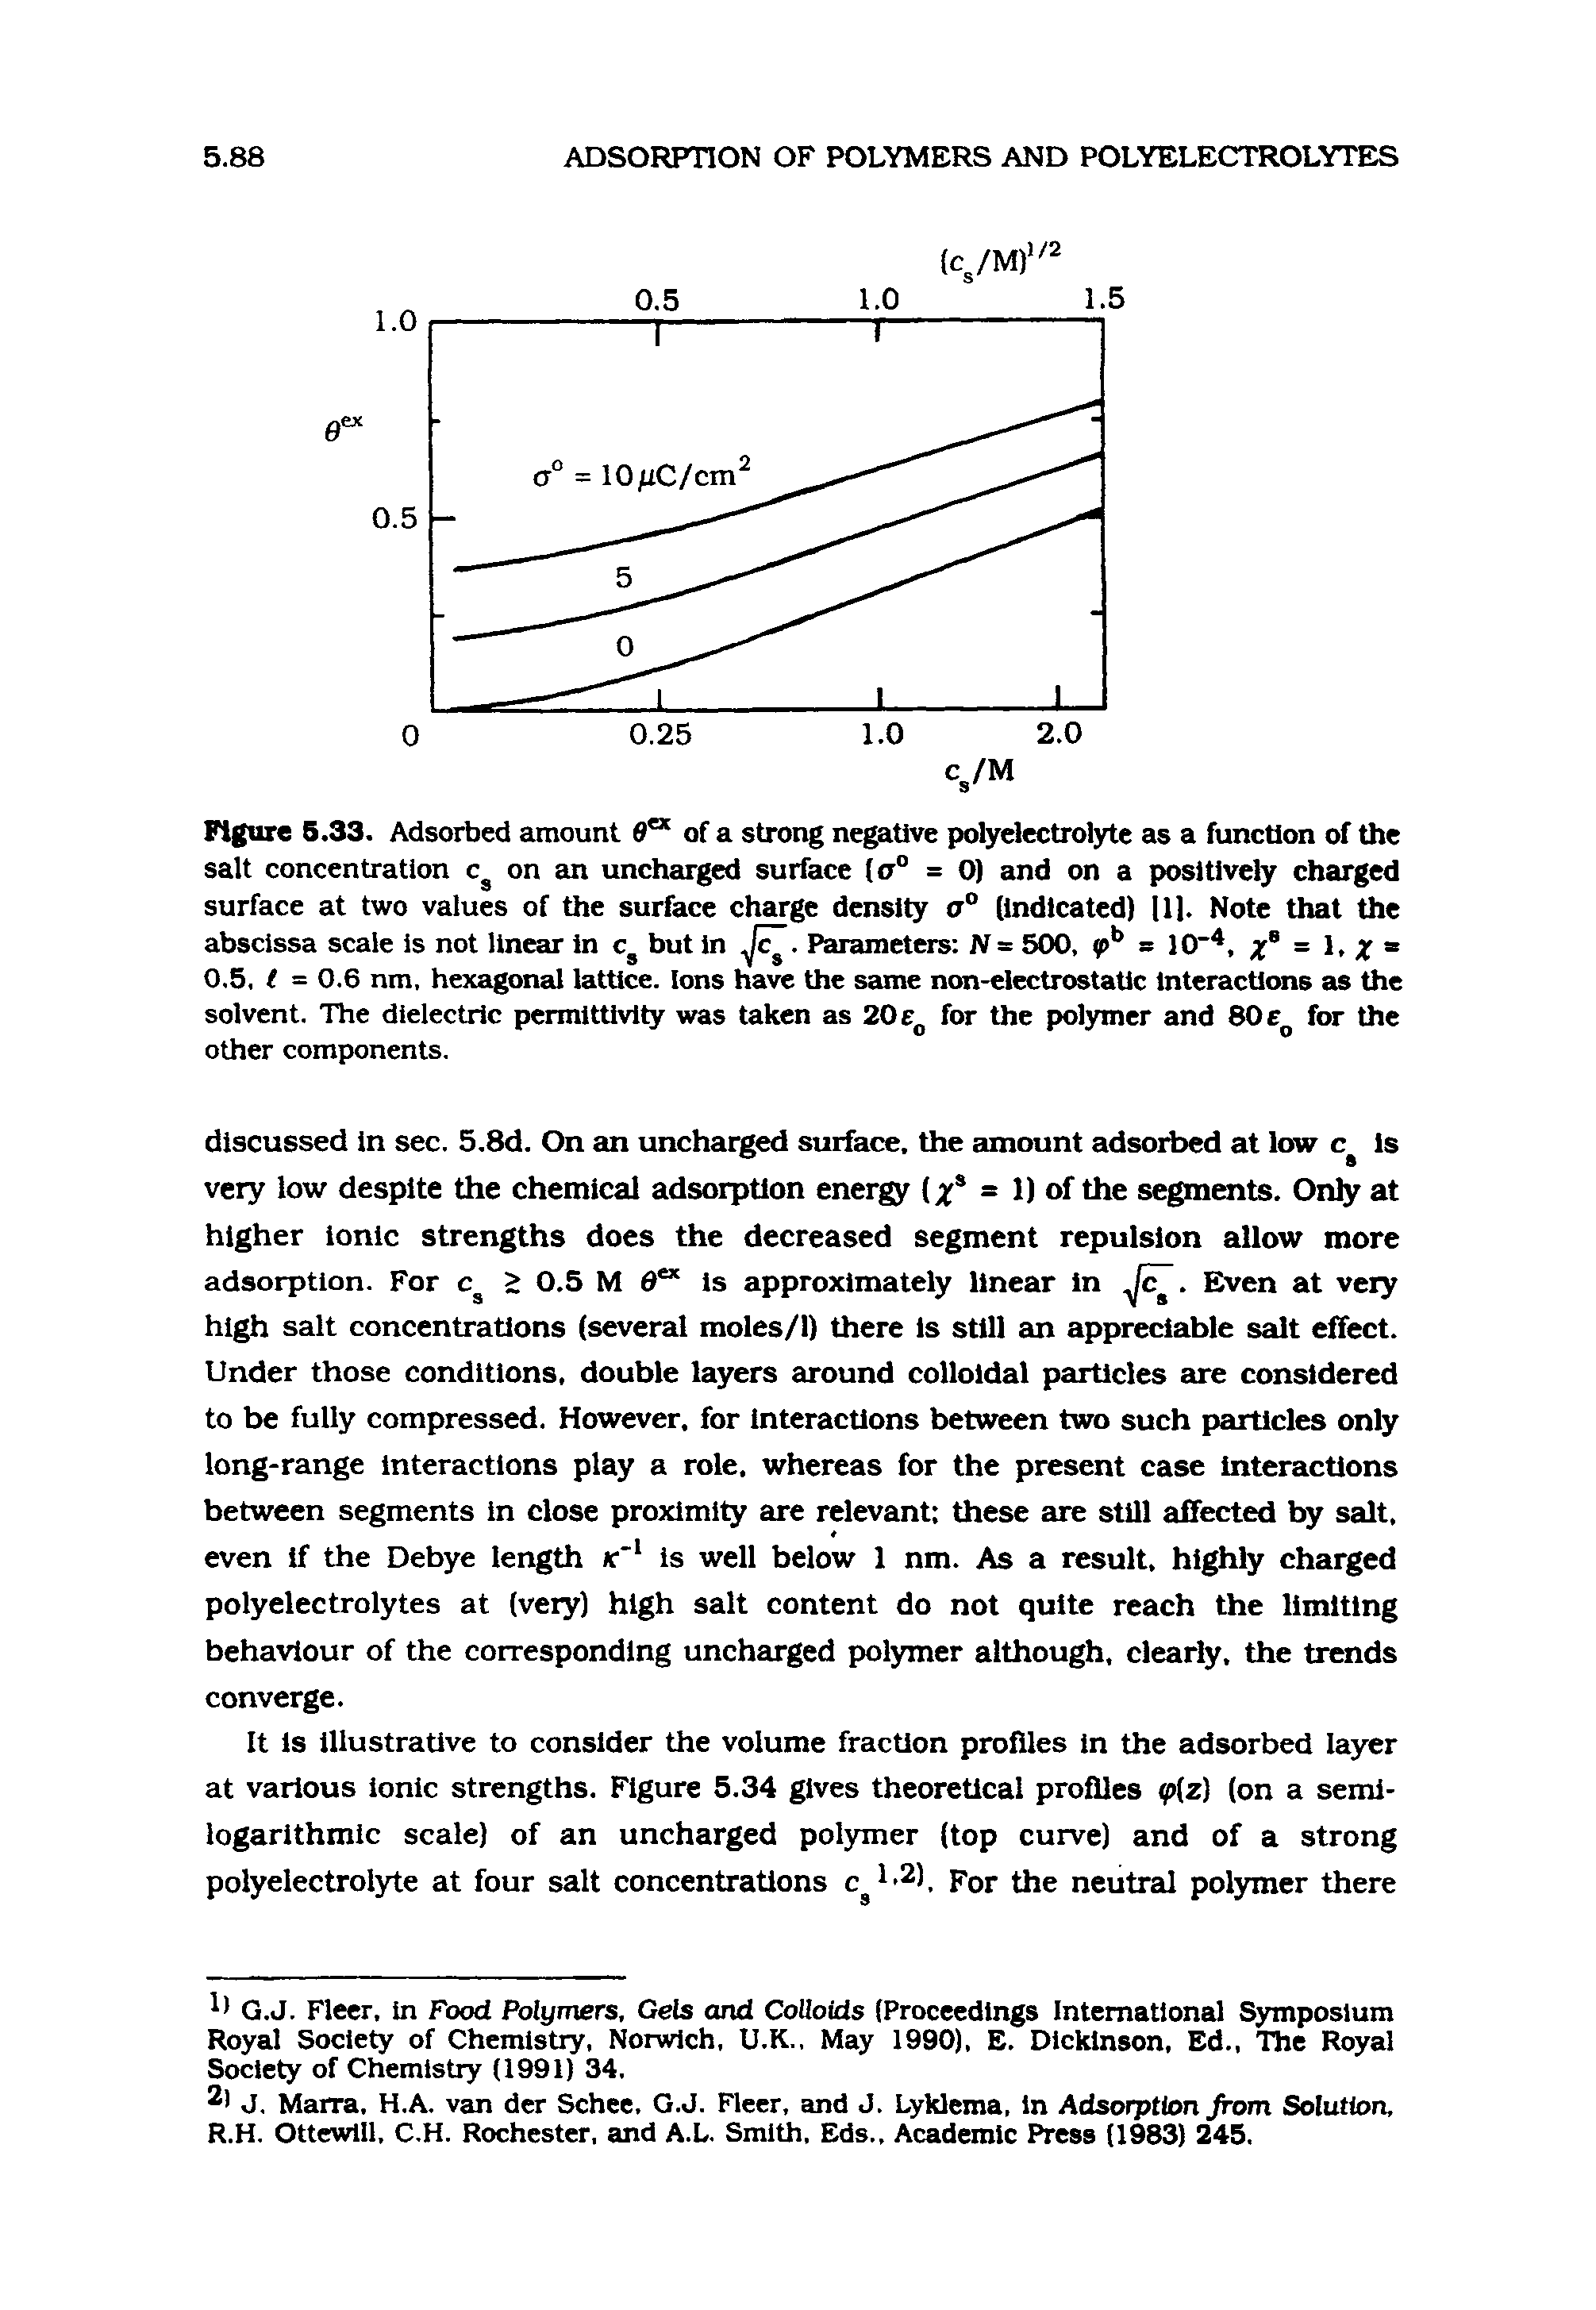 Figure 5.33. Adsorbed amount 0 of a strong negative polyelectrolytc as a function of the salt concentration on an uncharged surface = 0) and on a positively charged surface at two values of the surface charge density a° (indicated) U). Note that the abscissa scale is not linear in but in. c. Parameters N = 500, = 10, = L. IT =...